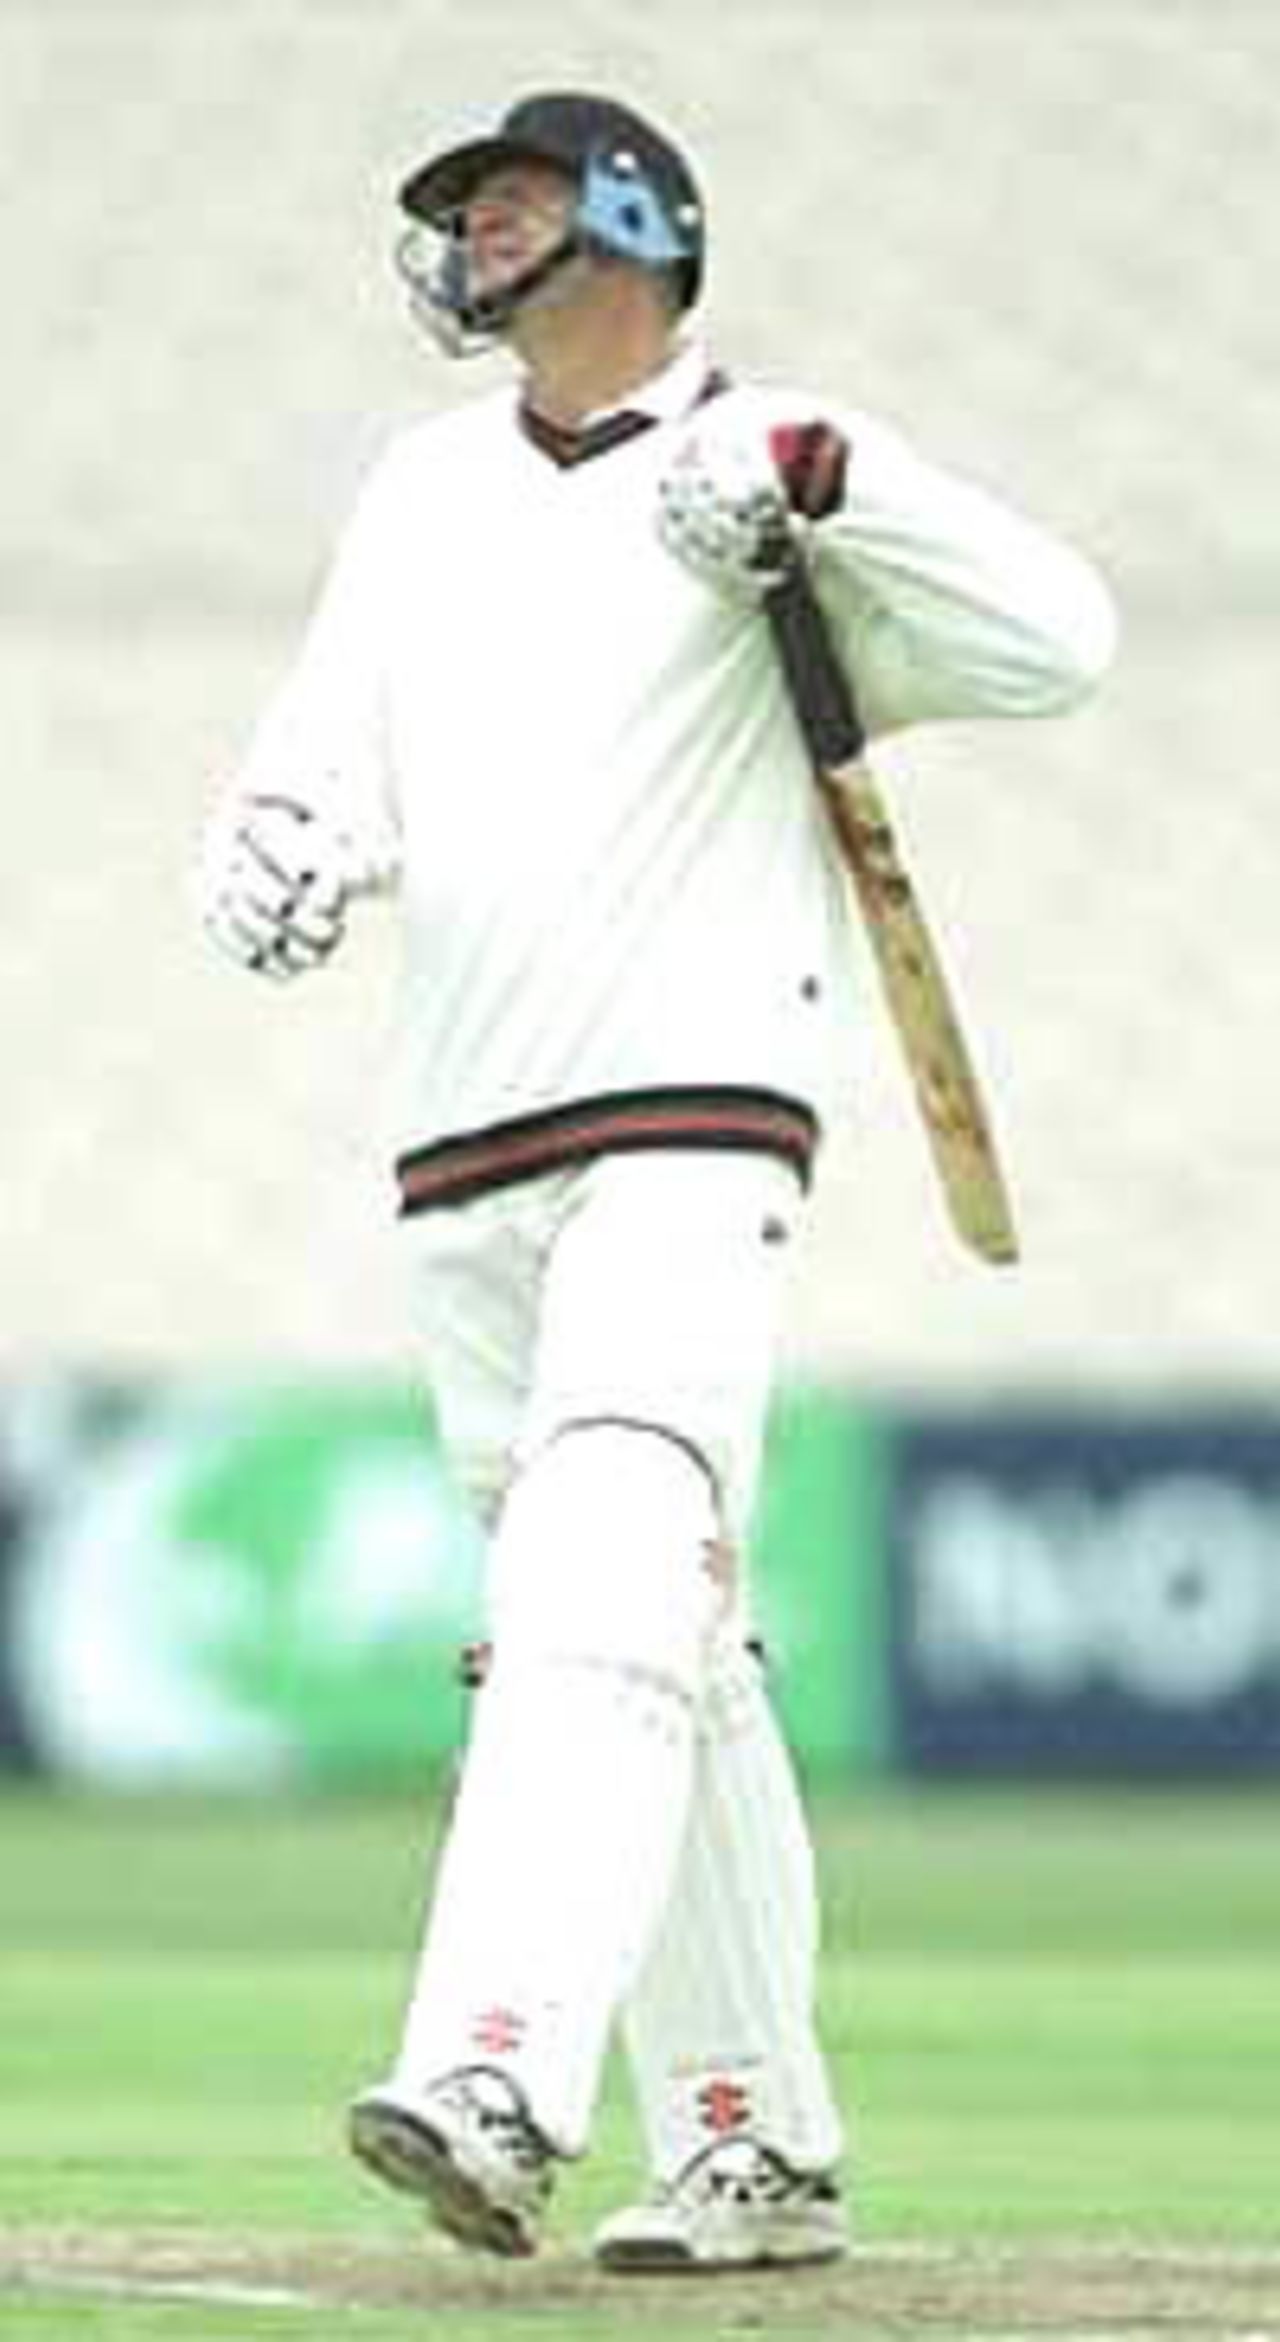 Peter Martin feels the pain after being hit on the hand off Dominic Cork, PPP healthcare County Championship Division One, 2000, Lancashire v Derbyshire, Old Trafford, Manchester, 31May-03Jun 2000 (Day 2).